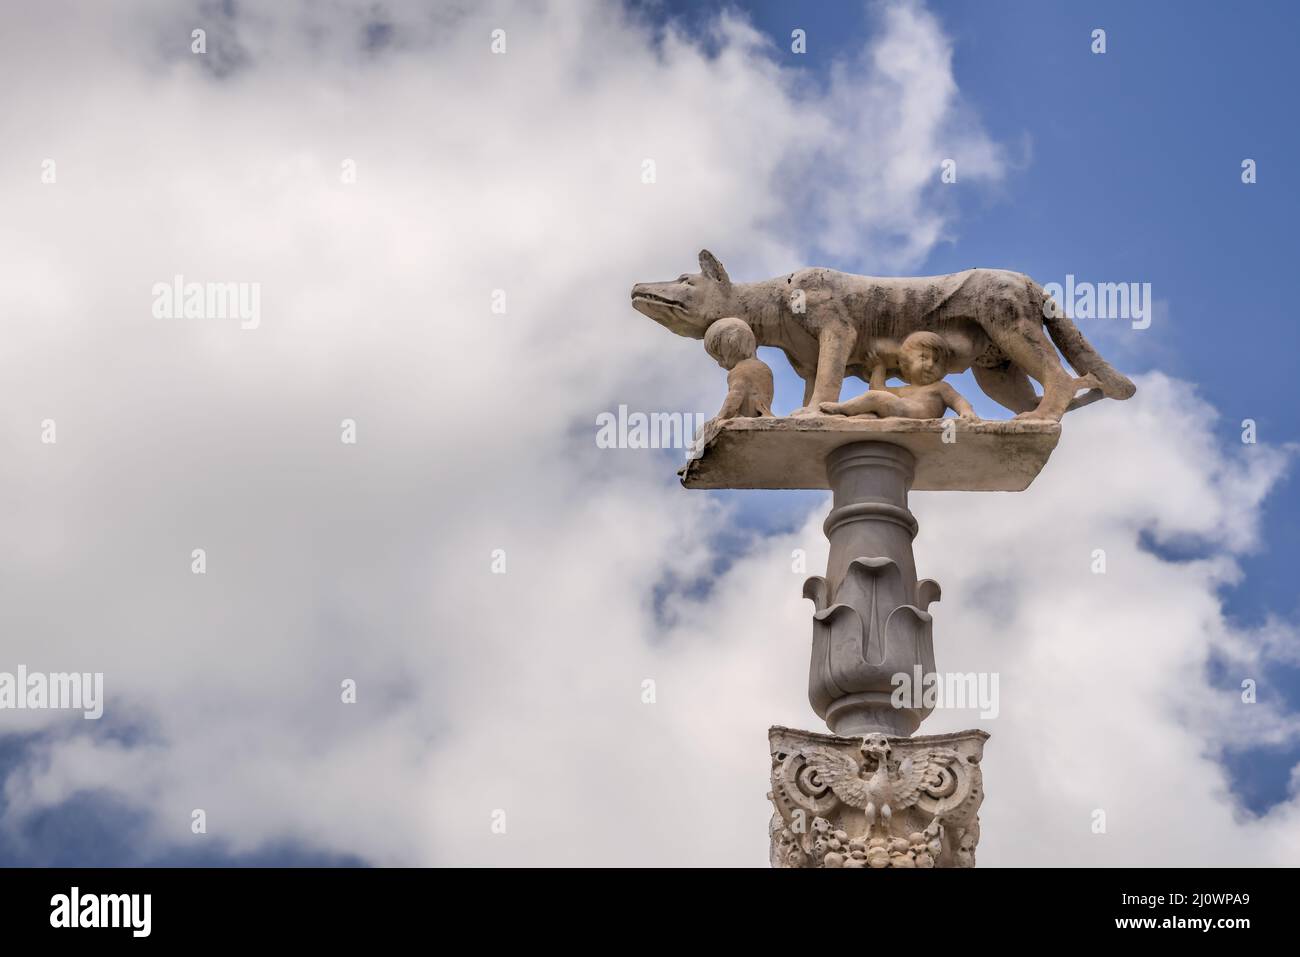 SIENNA, TUSCANY, ITALY - MAY 18 : She-wolf suckling infants Romulus and Remus near Sienna Cathedral in Sienna, Tuscany, Italy on Stock Photo